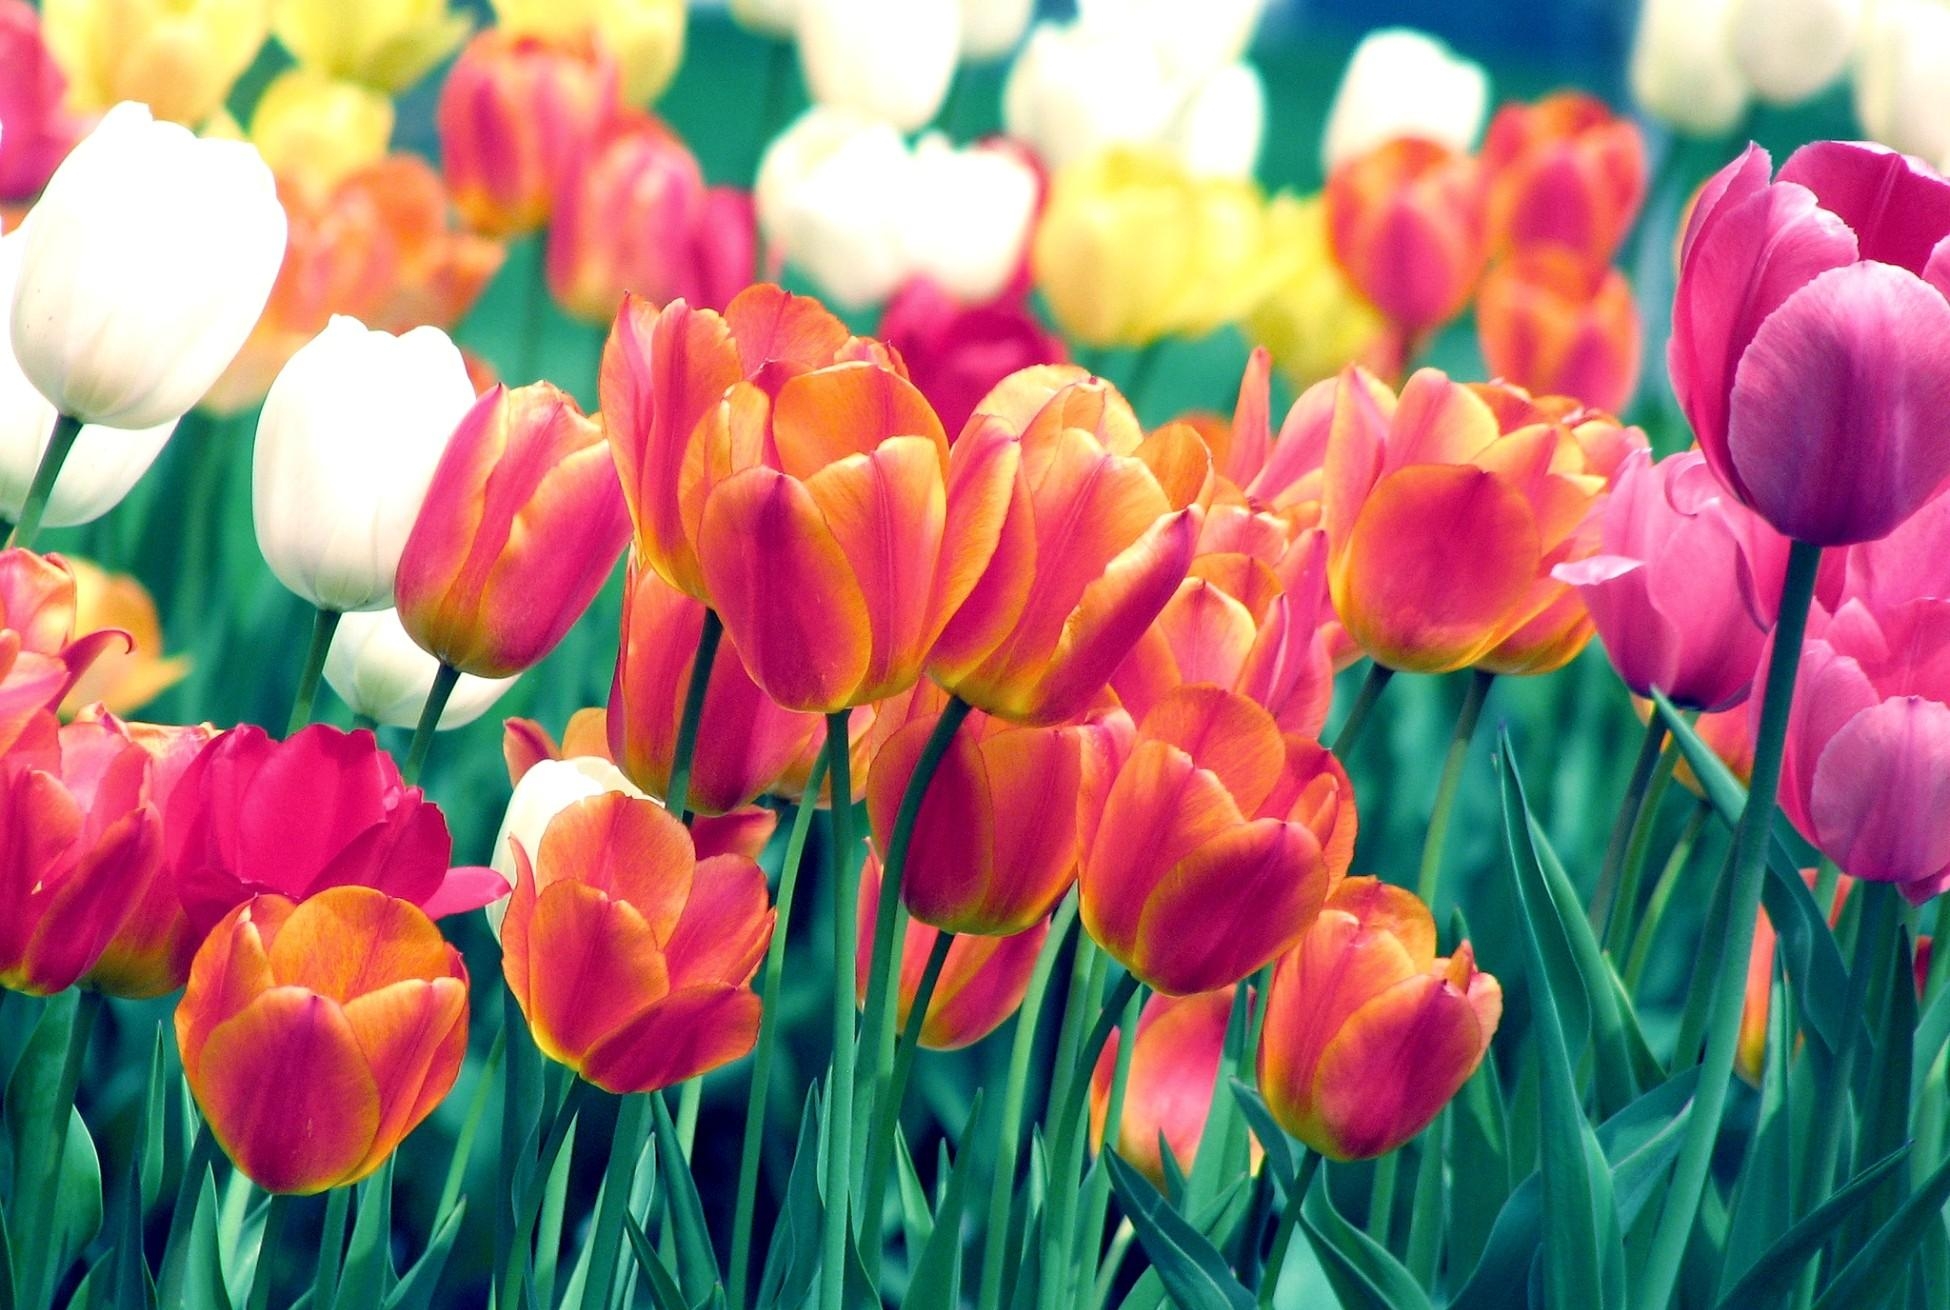 tulips, flowers, spring Wallpaper, HD Flowers 4K Wallpapers, Images ...